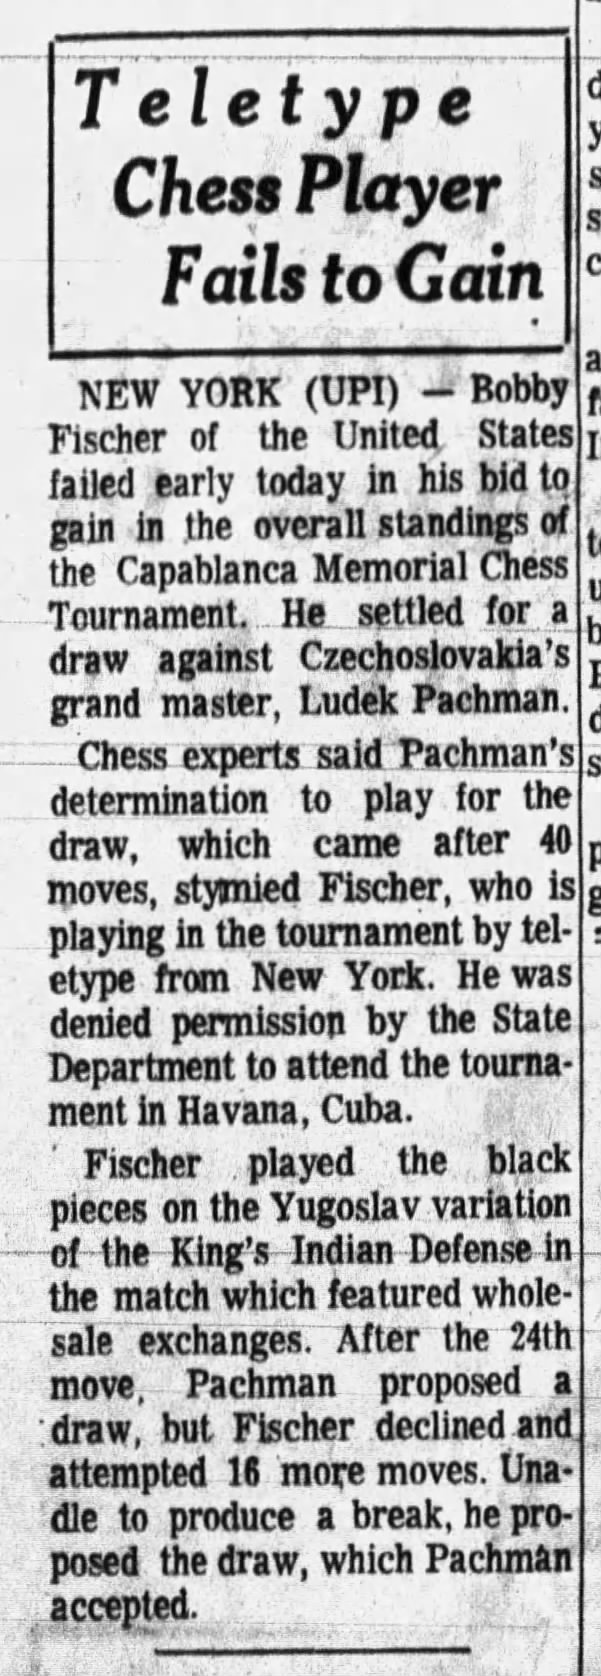 Teletype Chess Player Fails to Gain